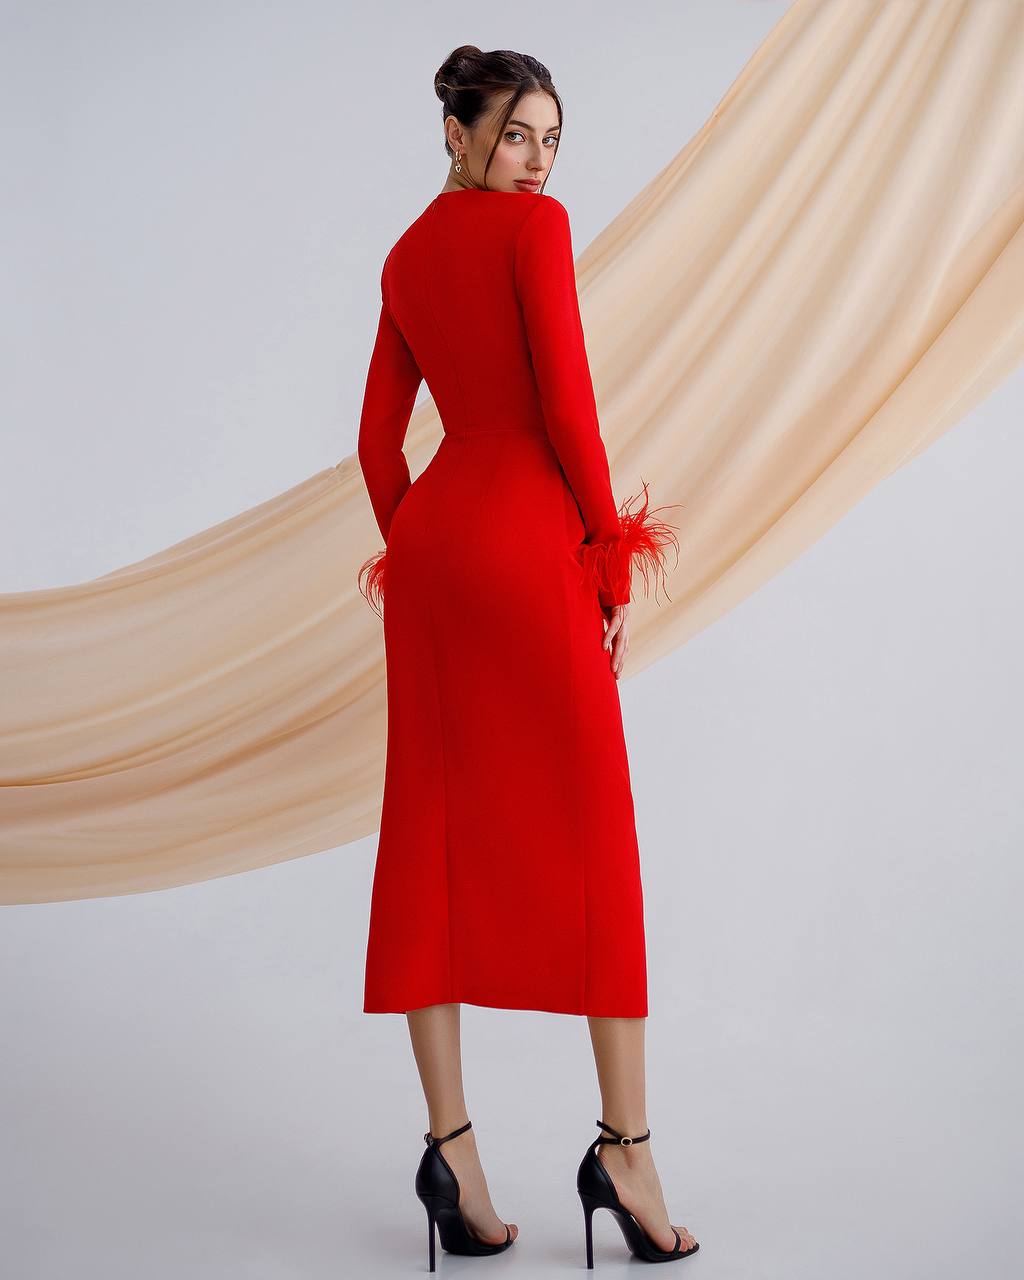 a woman in a red dress is standing with her hands on her hips